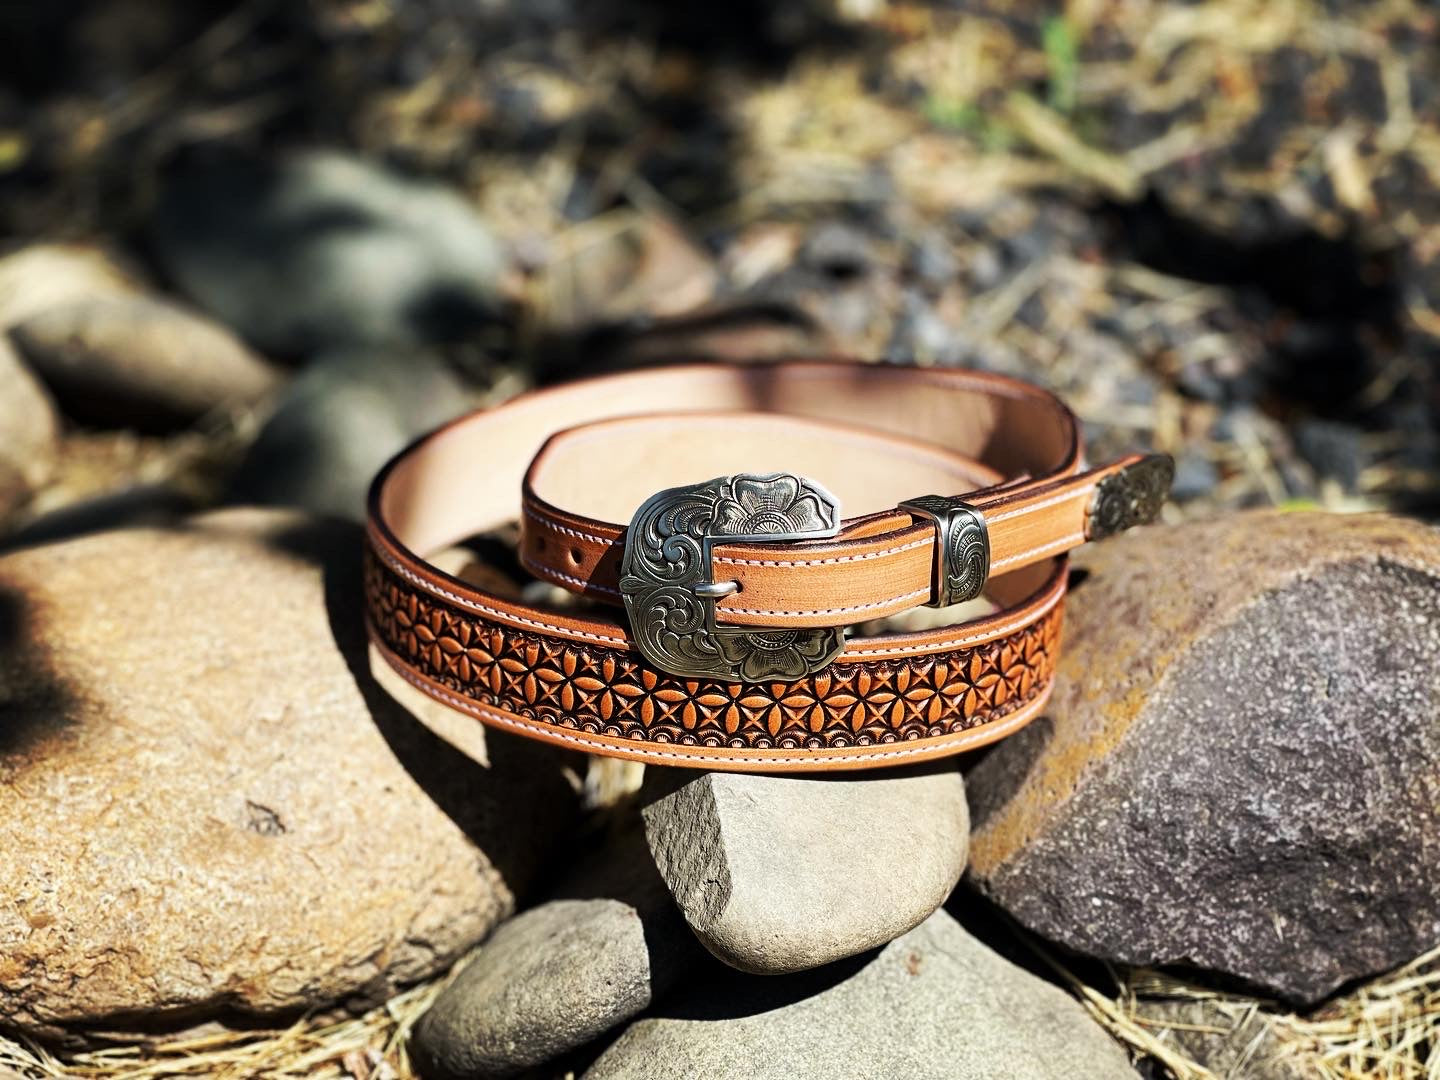 Partial Flower Carved/Geometric Stamped Belt - Ready to Ship